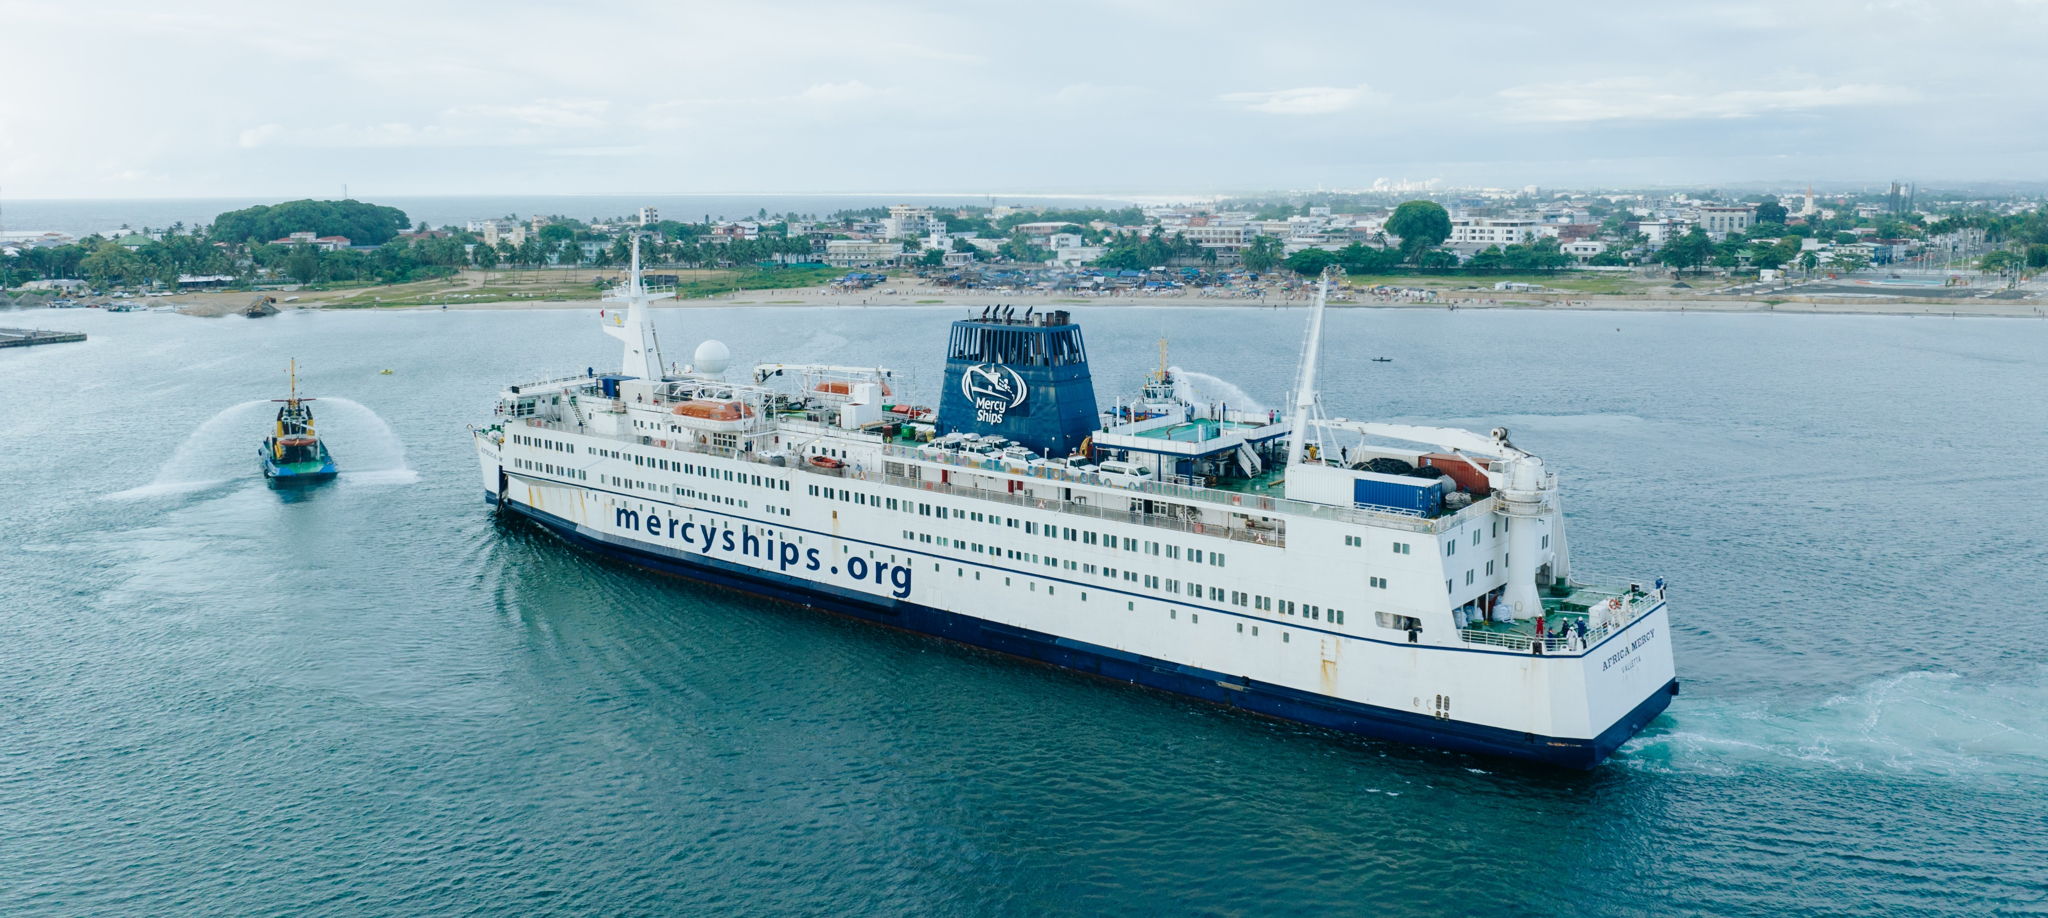 Africa Mercy arriving into the port of Toamasina, also called Tamatave ​ (photo© Mercy Ships / Caleb Brumley)